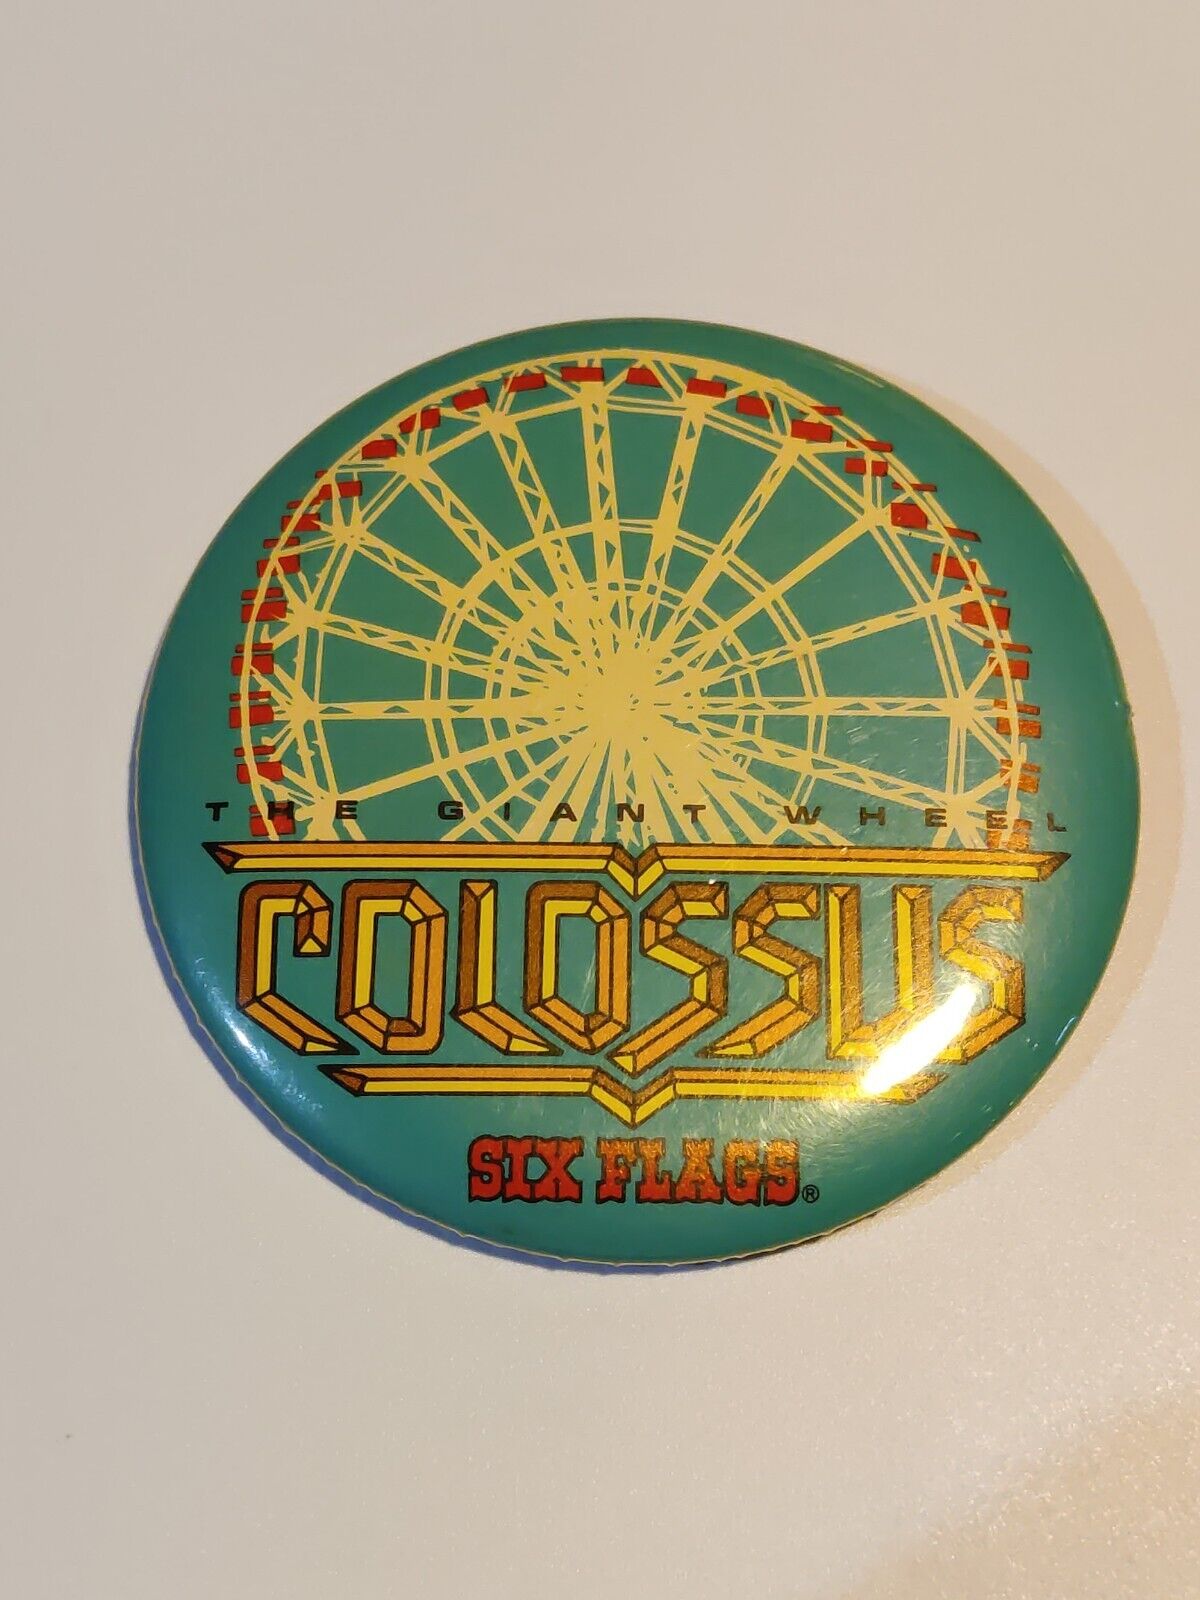 RARE Vintage 1980's Six Flags COLOSSUS Giant Wheel Pinback Button Rollercoaster